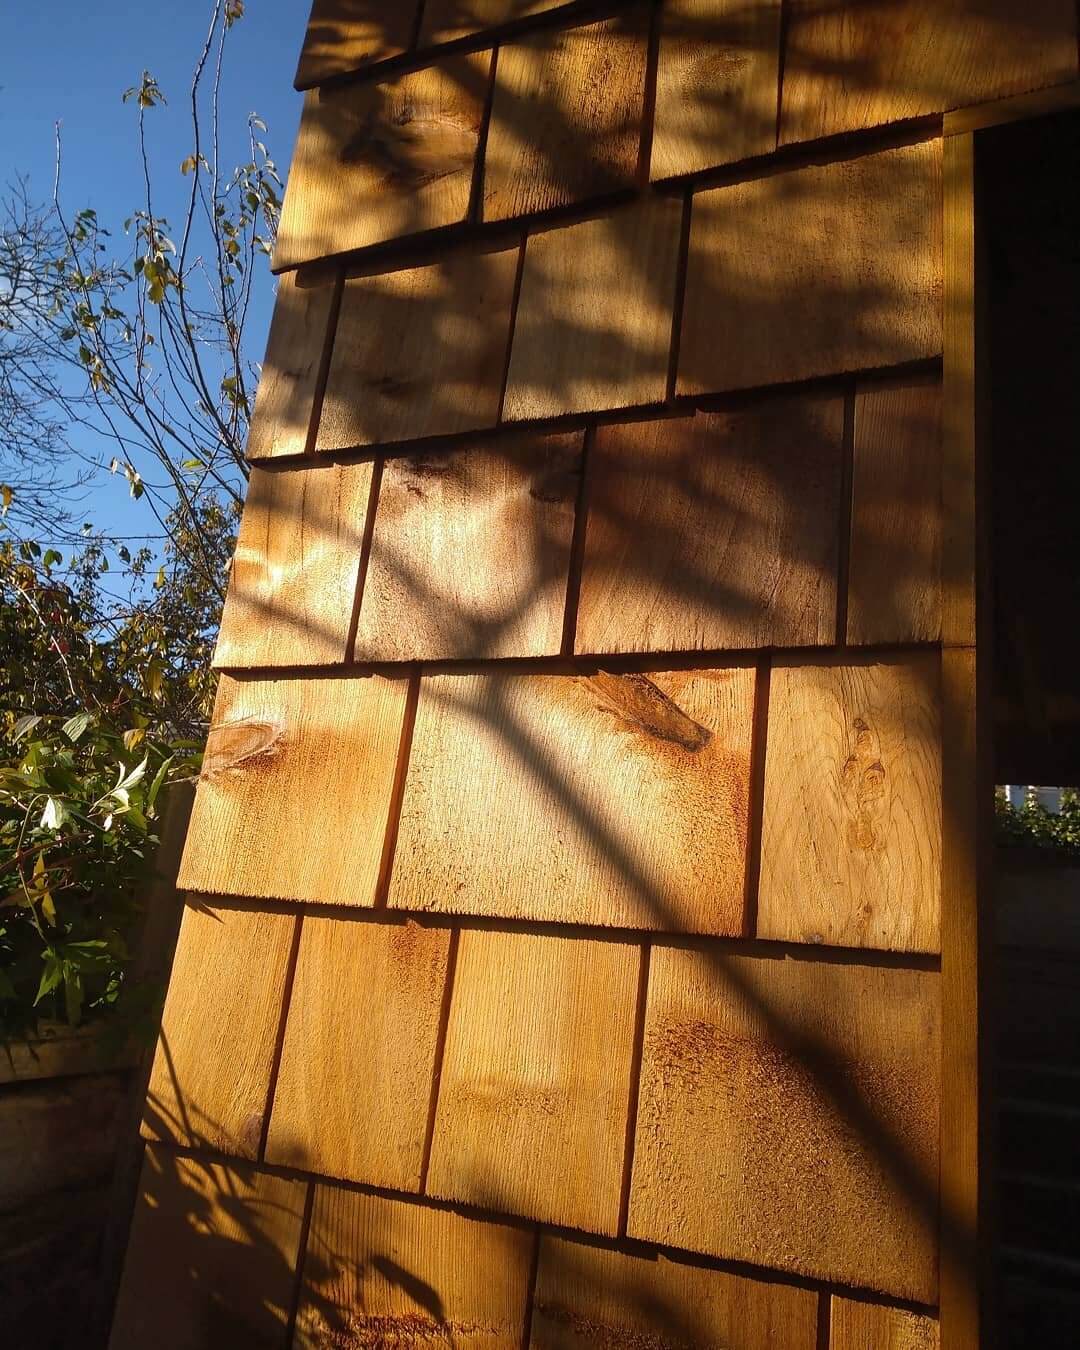 Dappled light on red cedar shingles. We love the warmth and rich colour these give a garden room in Cambridgeshire we designed.
.
.
.
#gardenroom #garden #light #gardendesign #redcedar #cedarcladding #cedarshingles #cedar #design #cladding #timber #b